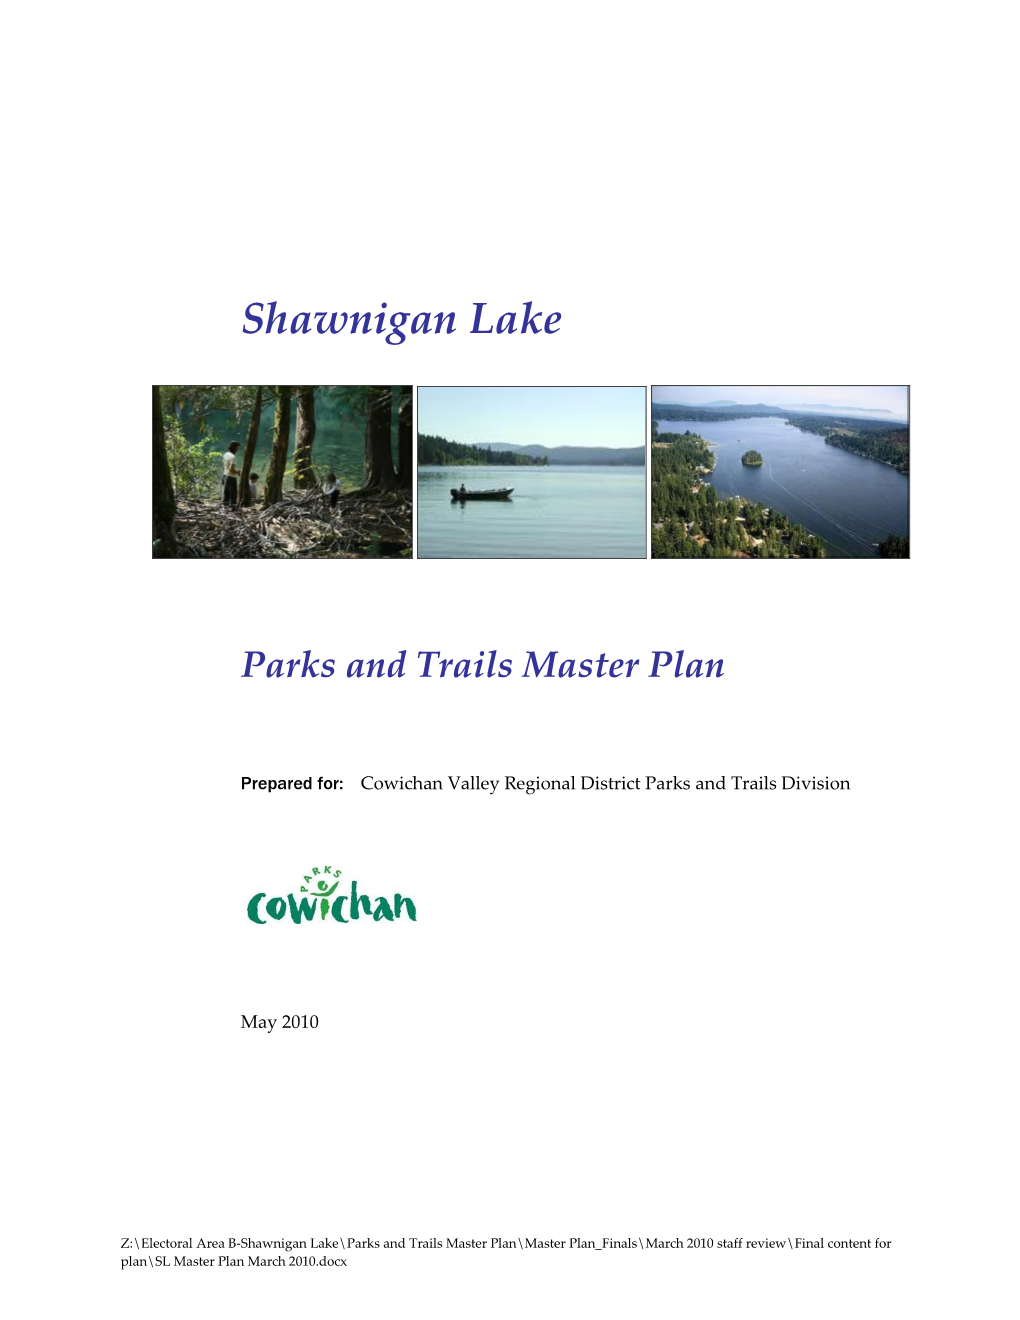 Shawnigan Lake Community Parks and Trails Master Plan